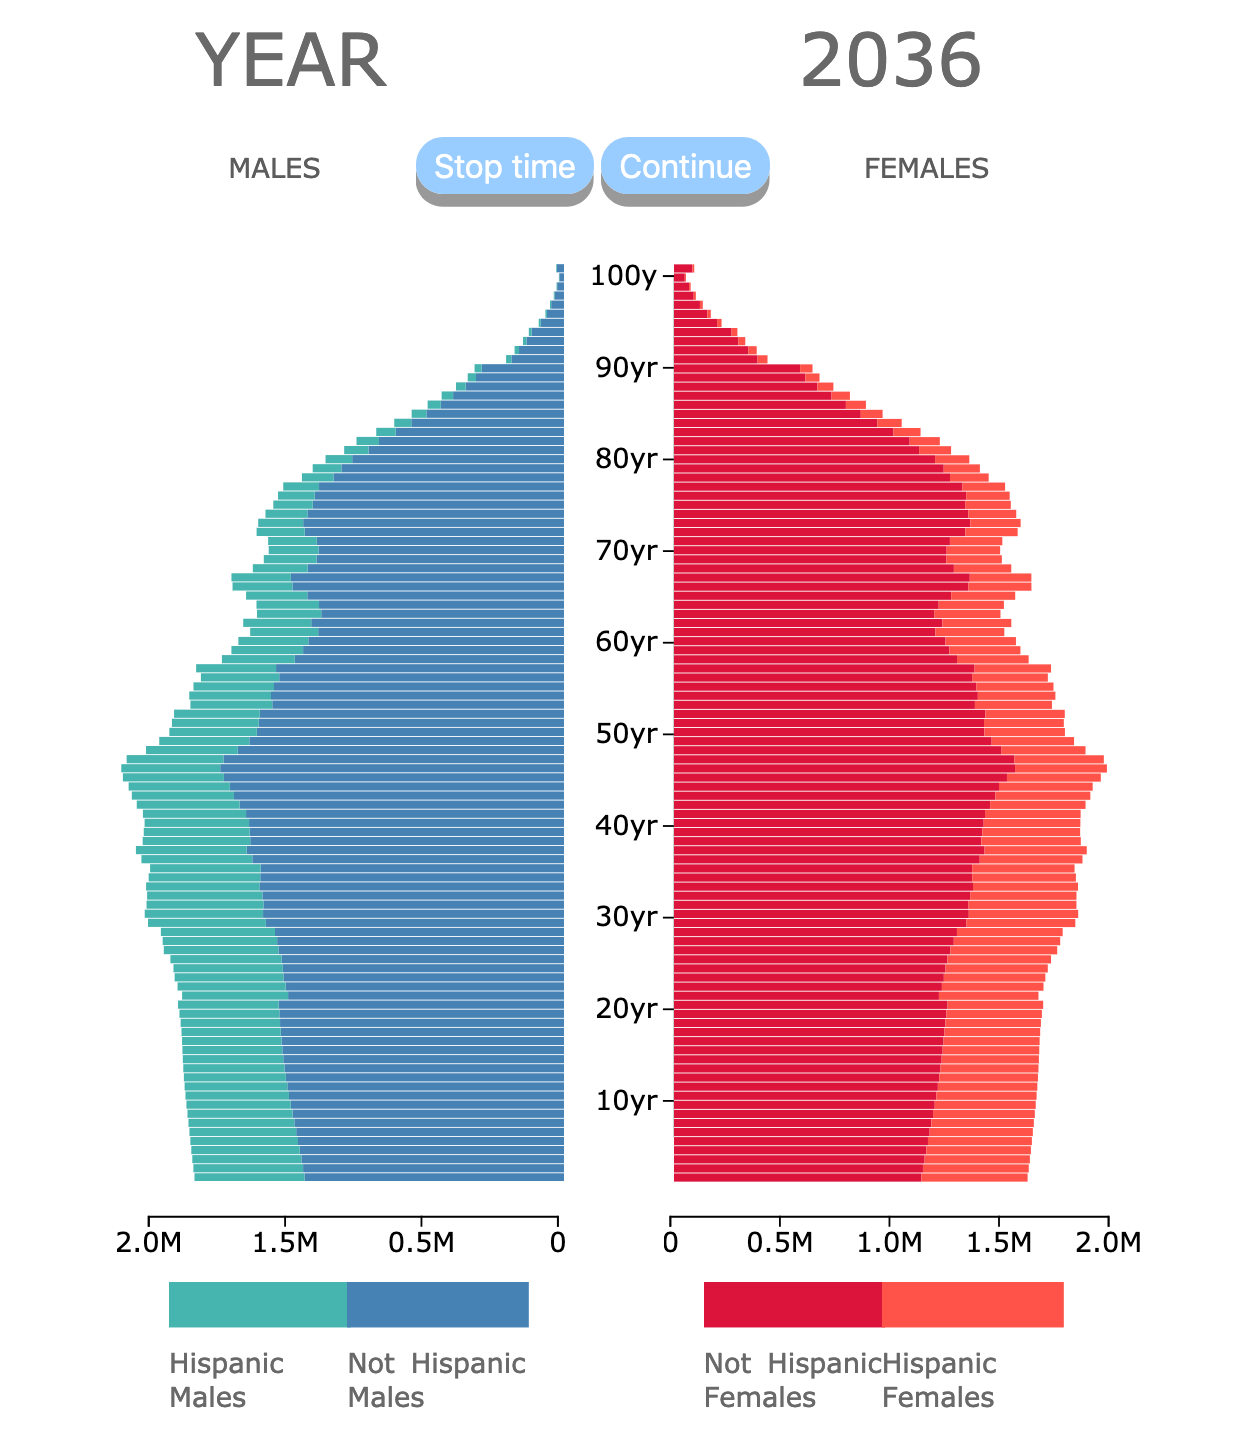 Population Pyramid of the USA by Ethnicity